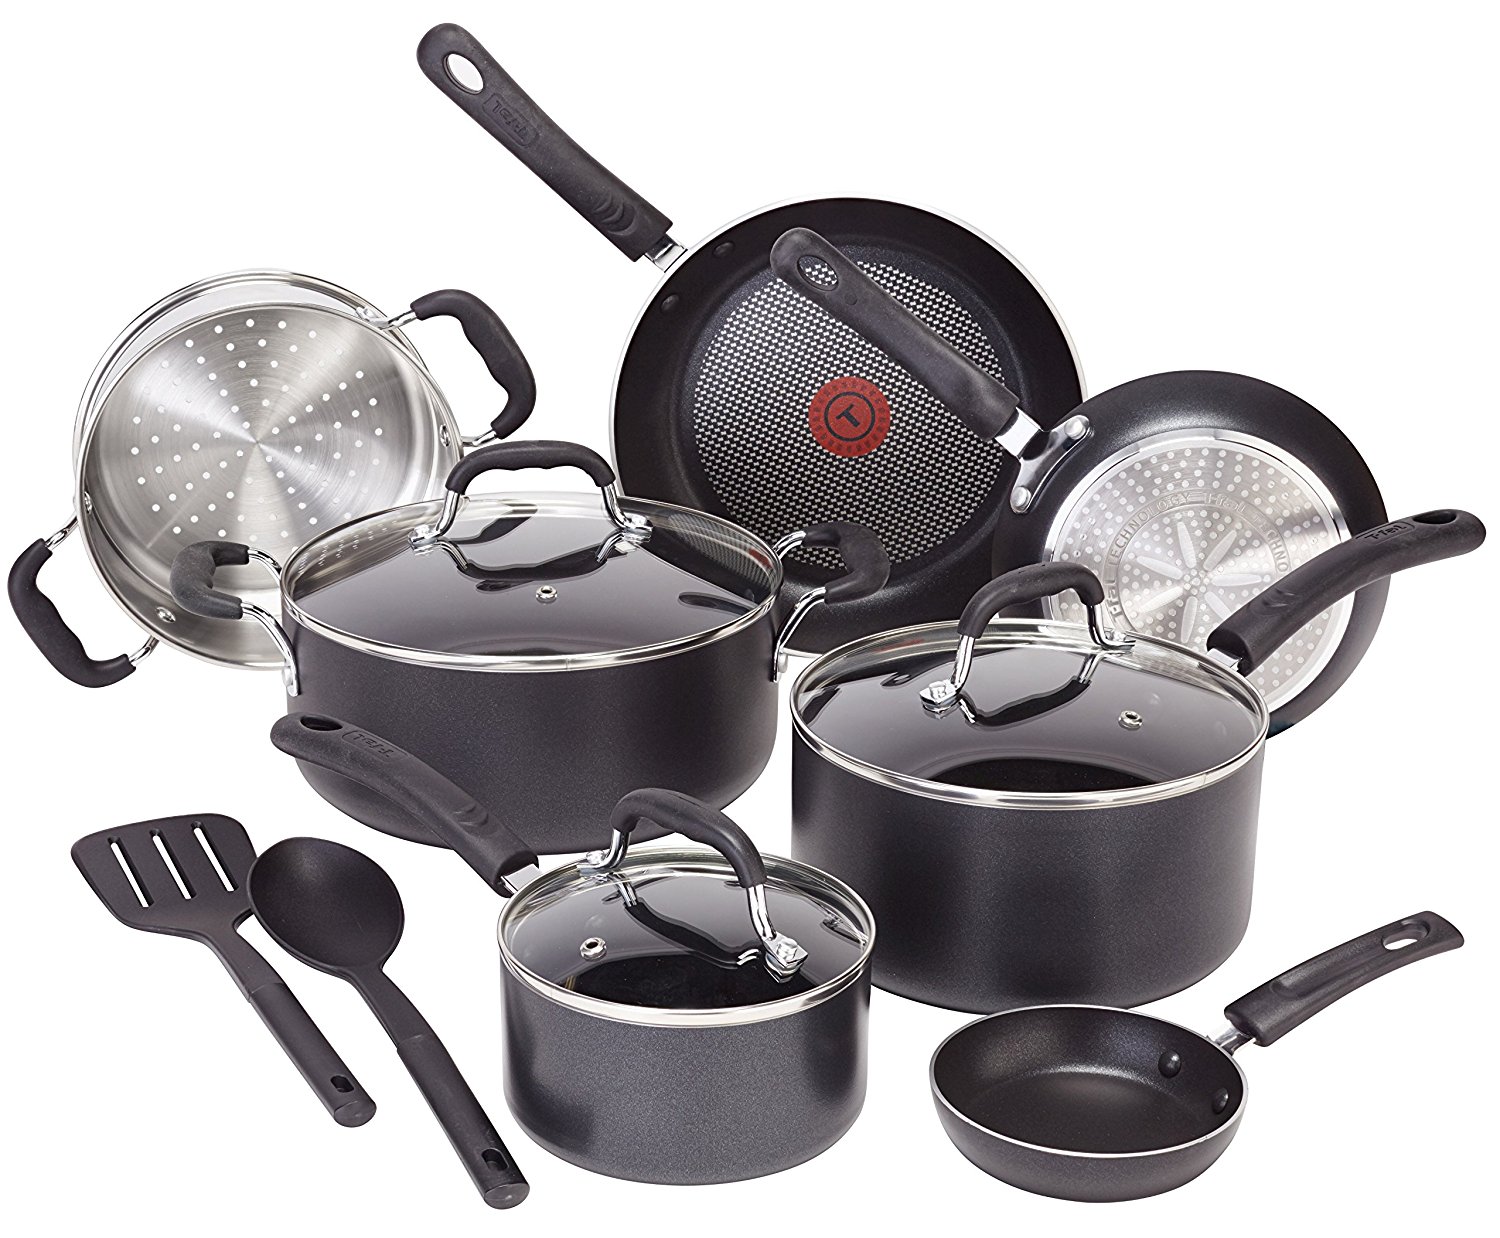 T-fal Professional Total Non-Stick Induction Cookware